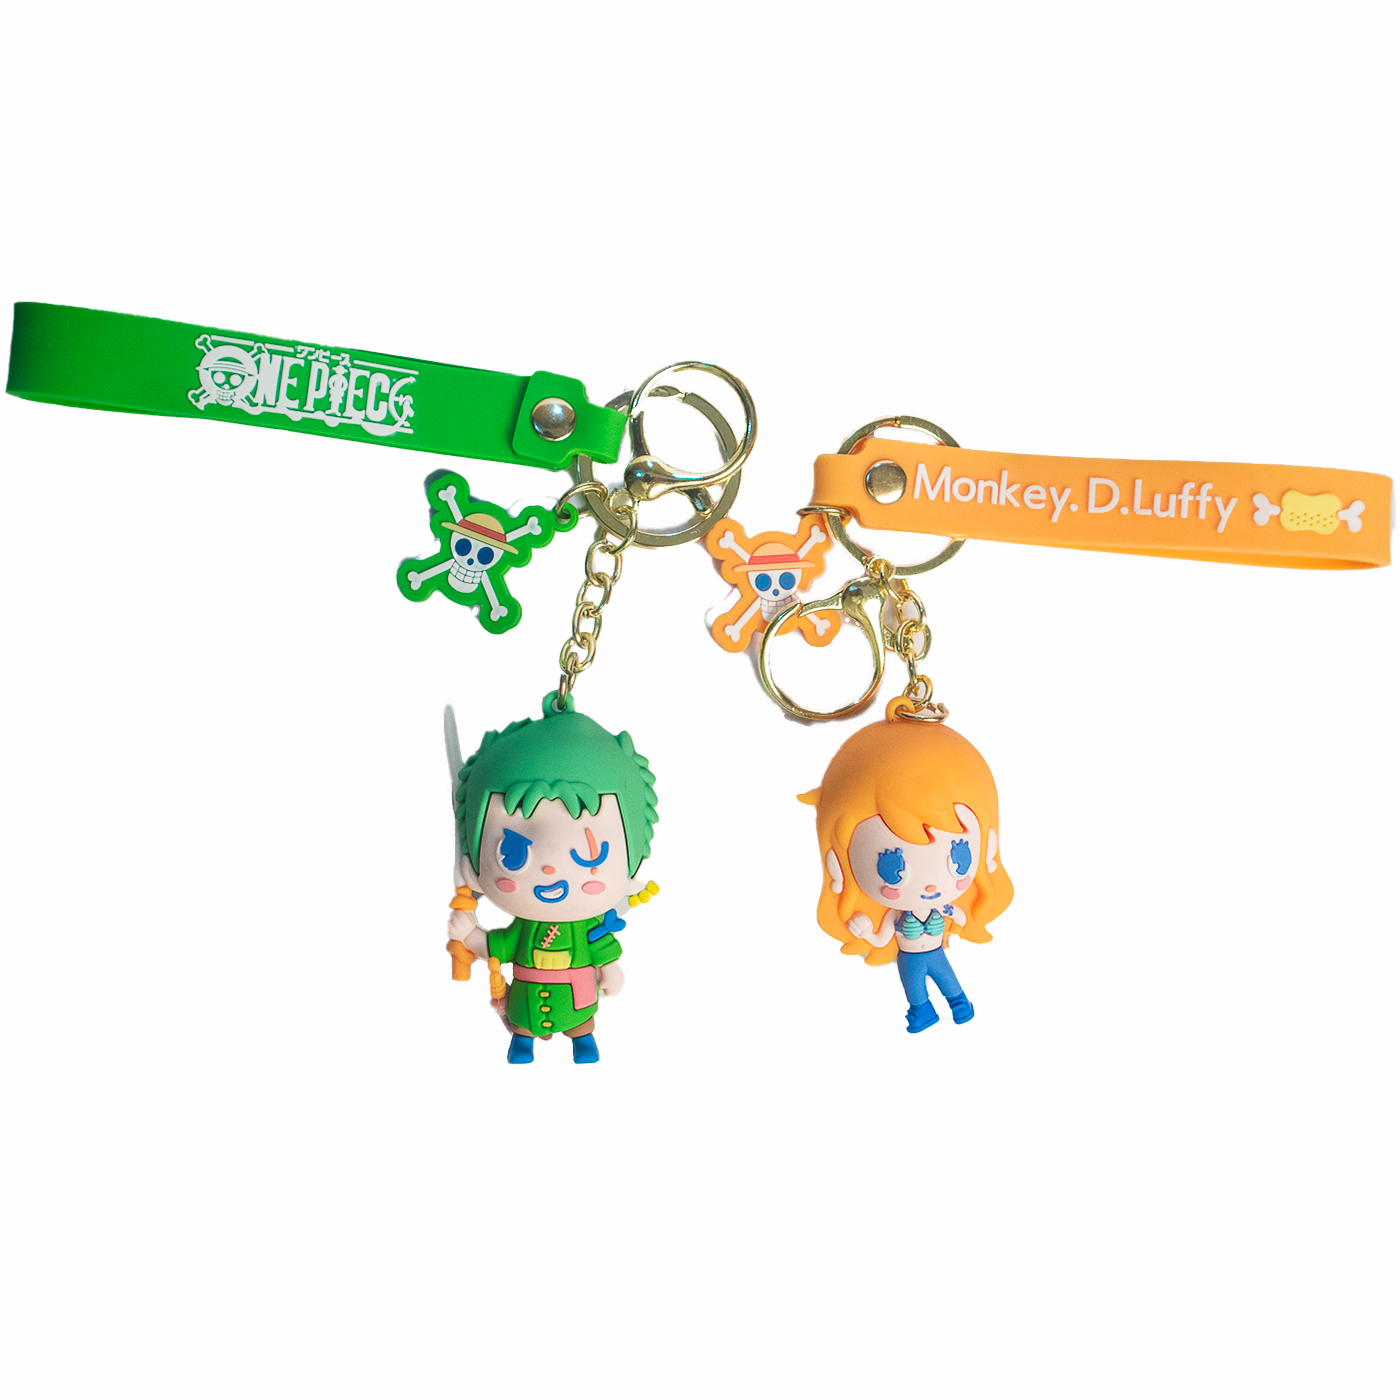 Buy Buko Fan Edition Lifestyle One Piece Anime Keychain Action Figure  Collection Party Supplies Birthday Gift Toys BENN BECKMAN Online at Low  Prices in India  Amazonin